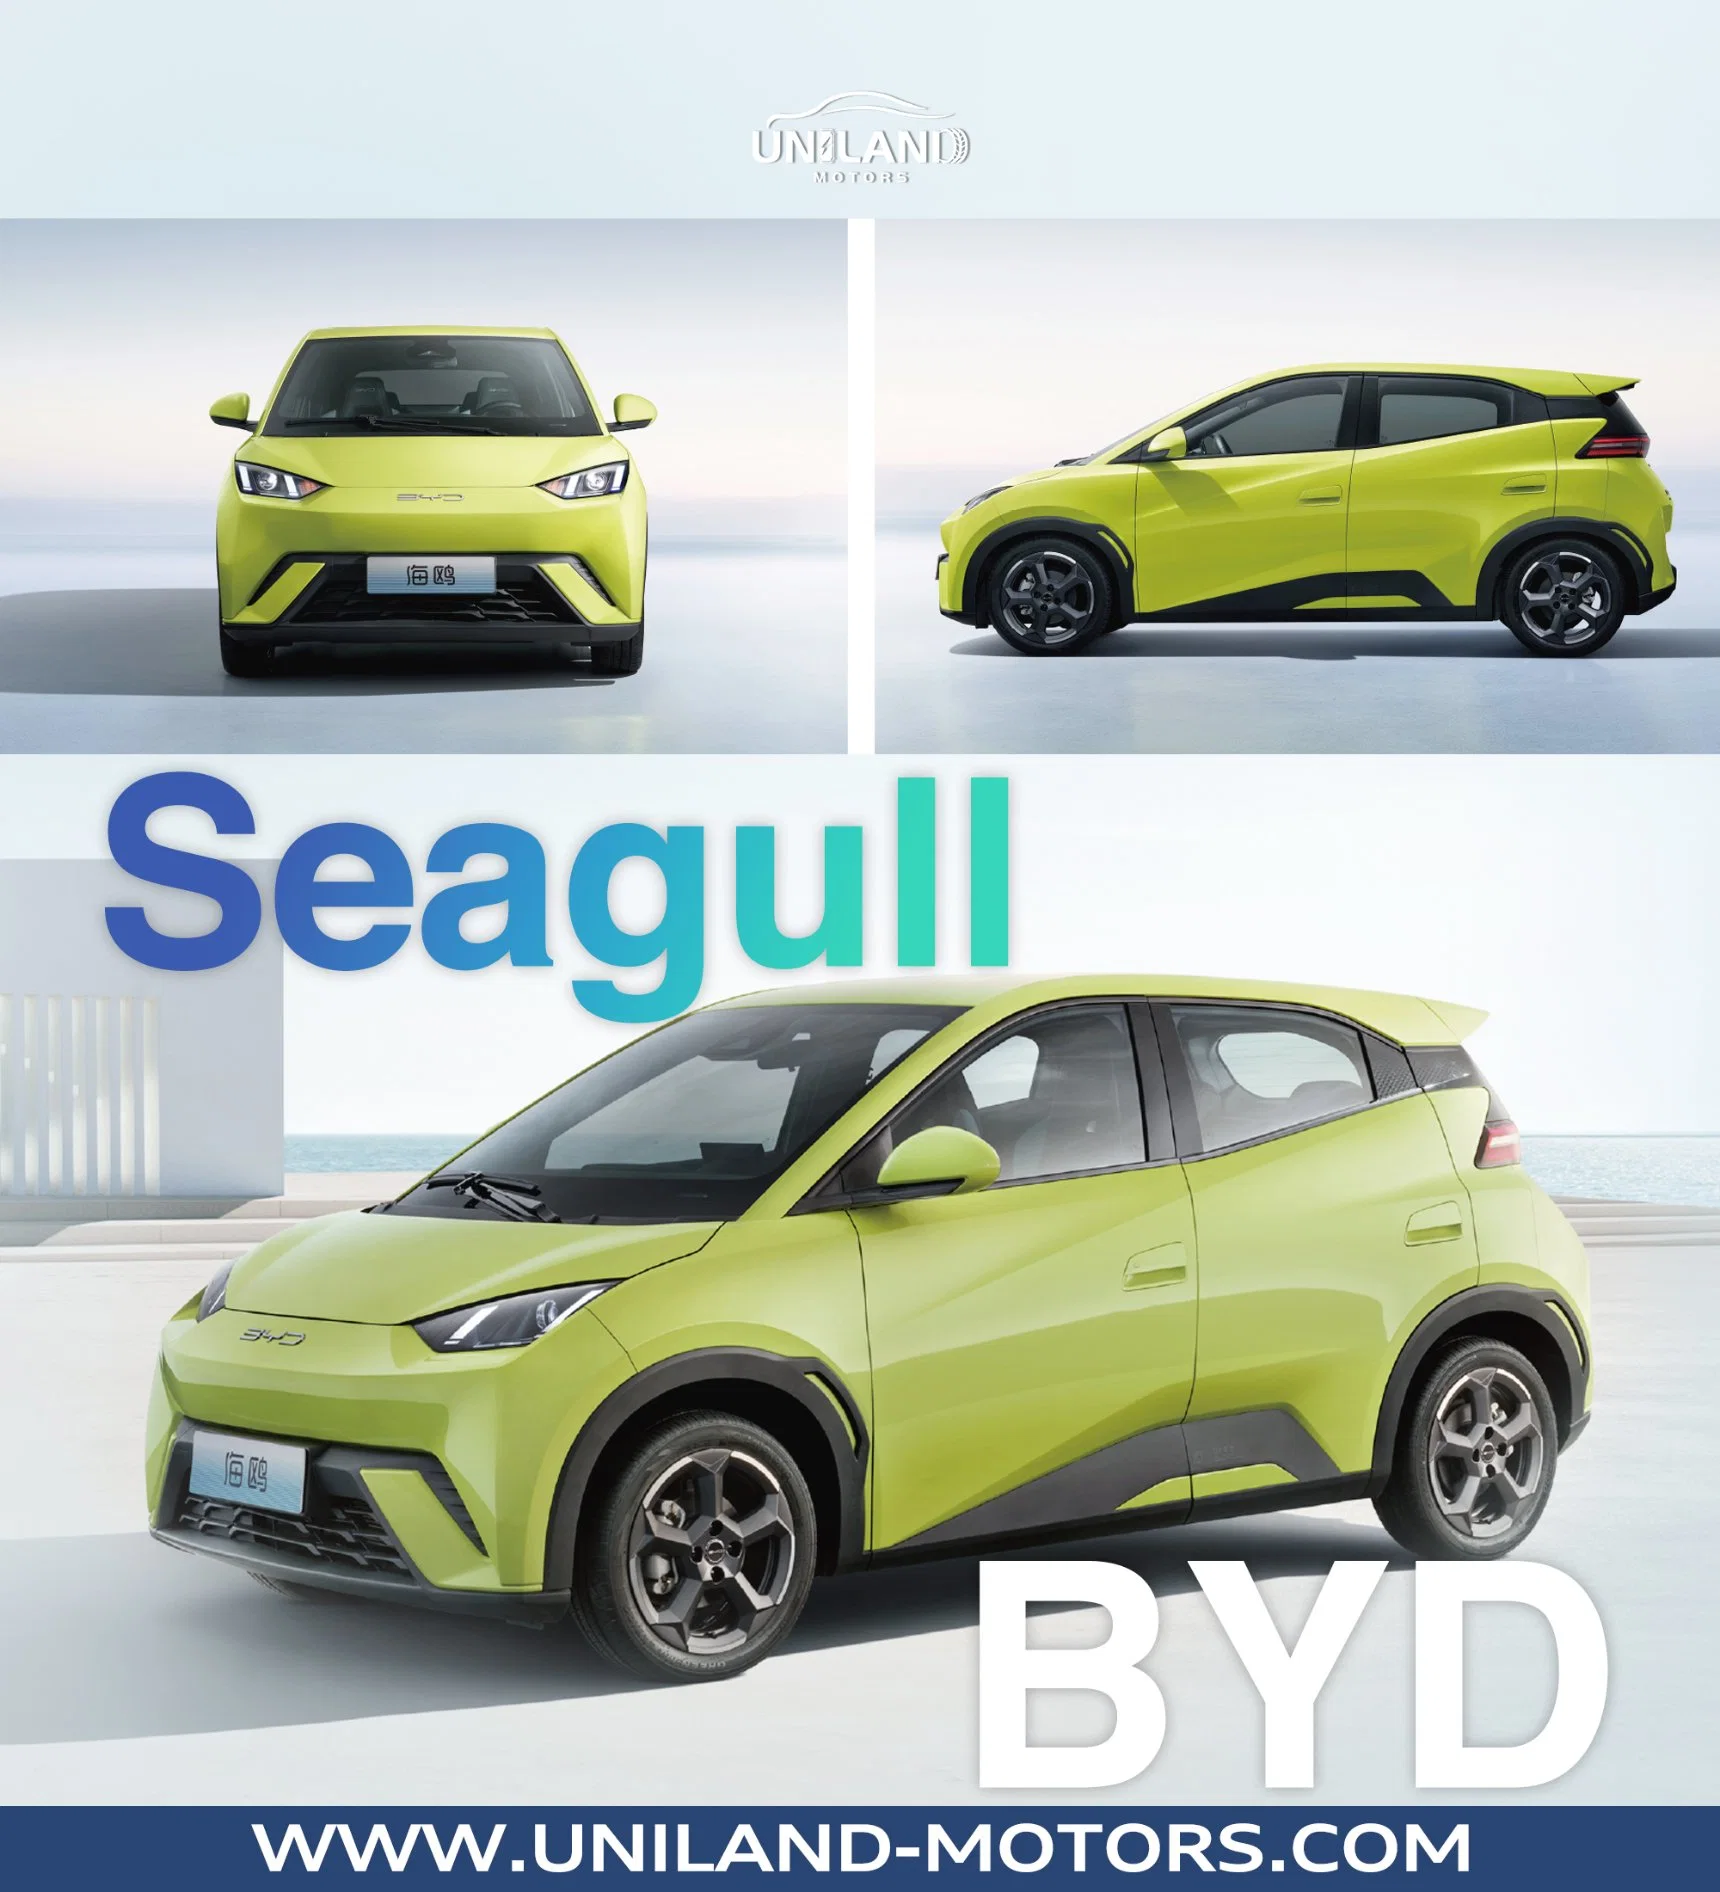 Byd Seagull Byd Electric Car 305km 405km Auto From China

Coche eléctrico Byd Seagull Byd 305km 405km Auto de China